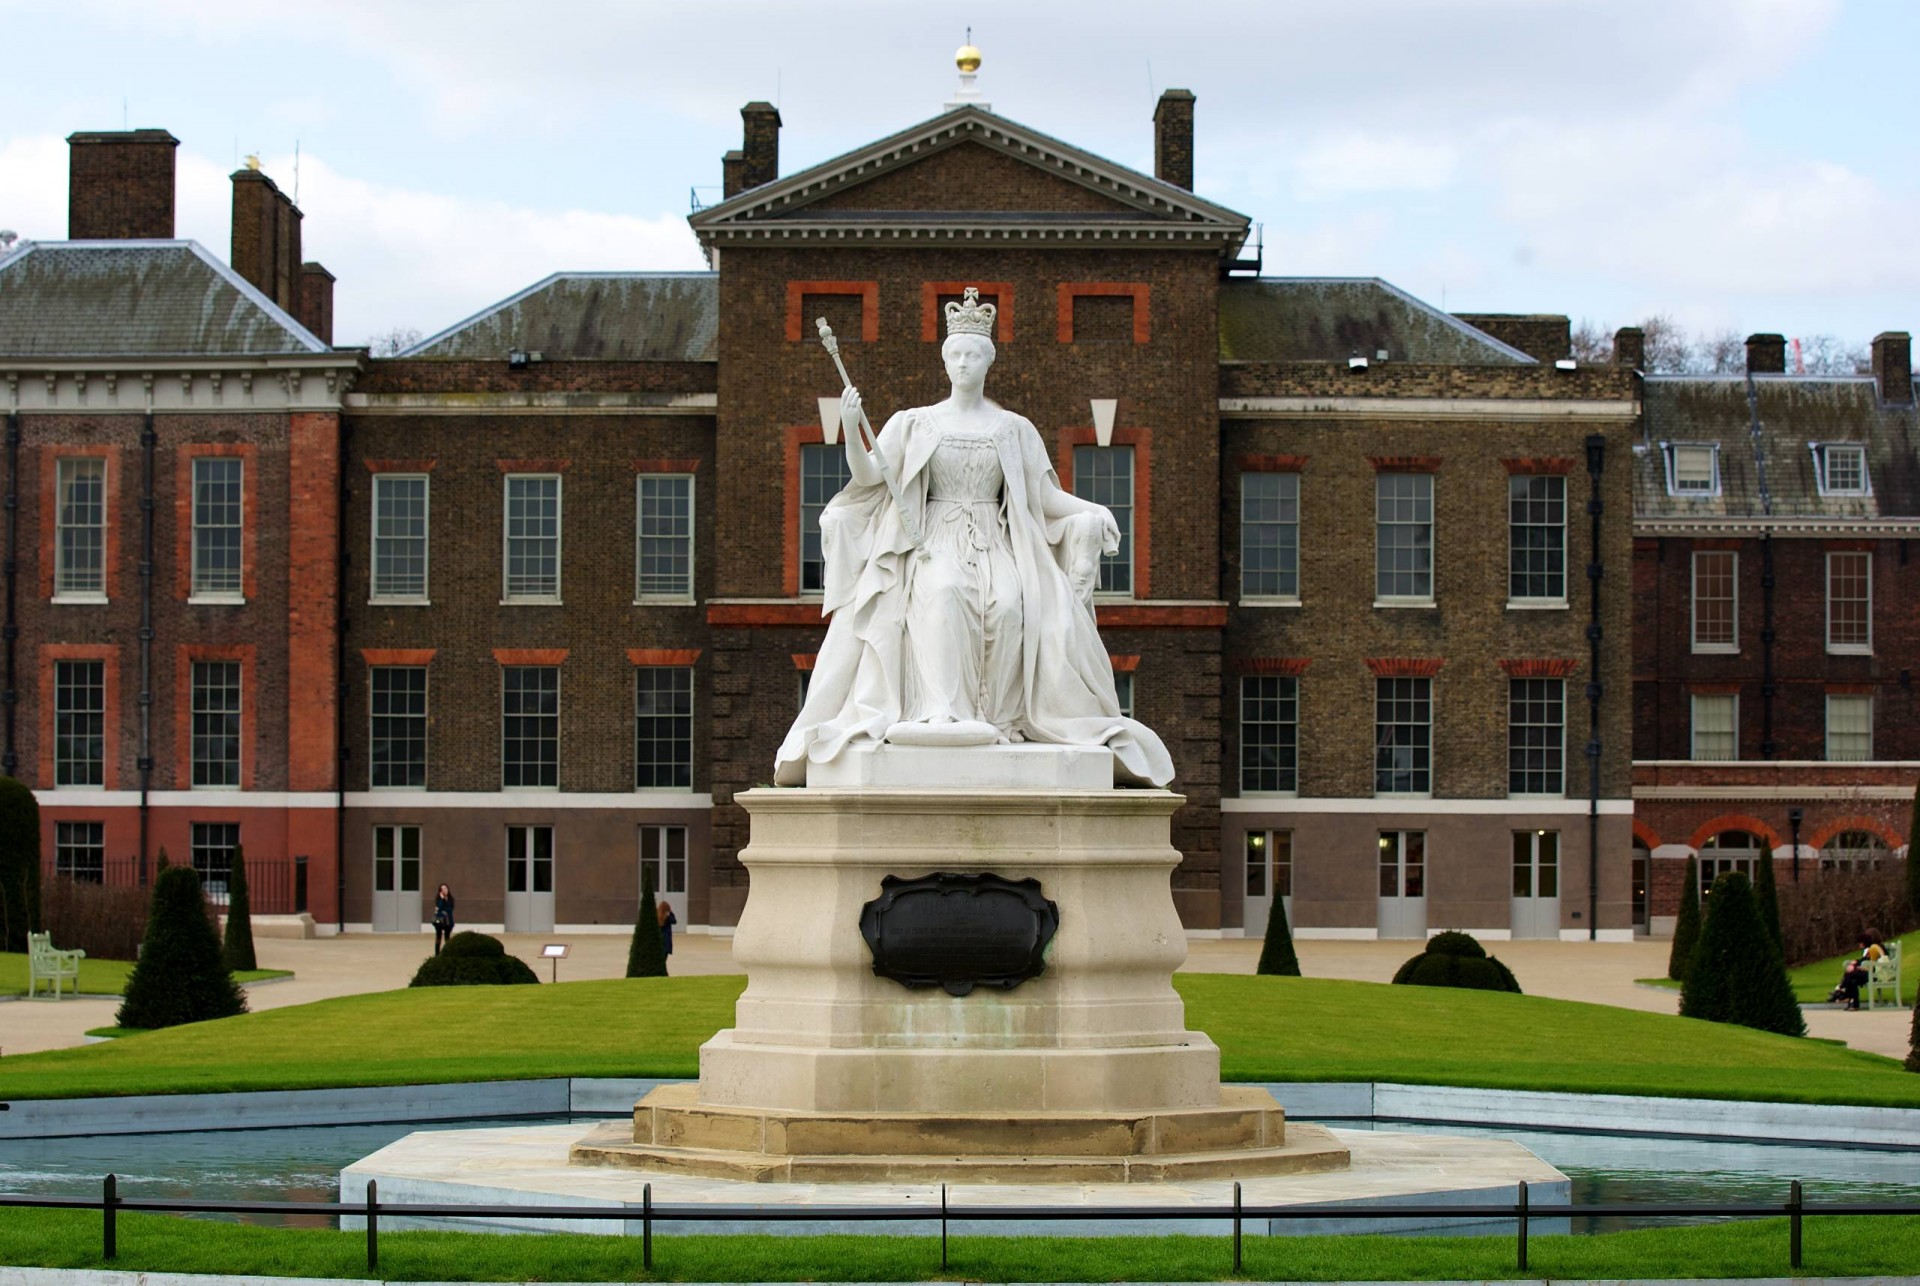 Kensington Palace - In front of the east front public entrance stands a statue of Queen Victoria, sculpted by her daughter Princess Louise.